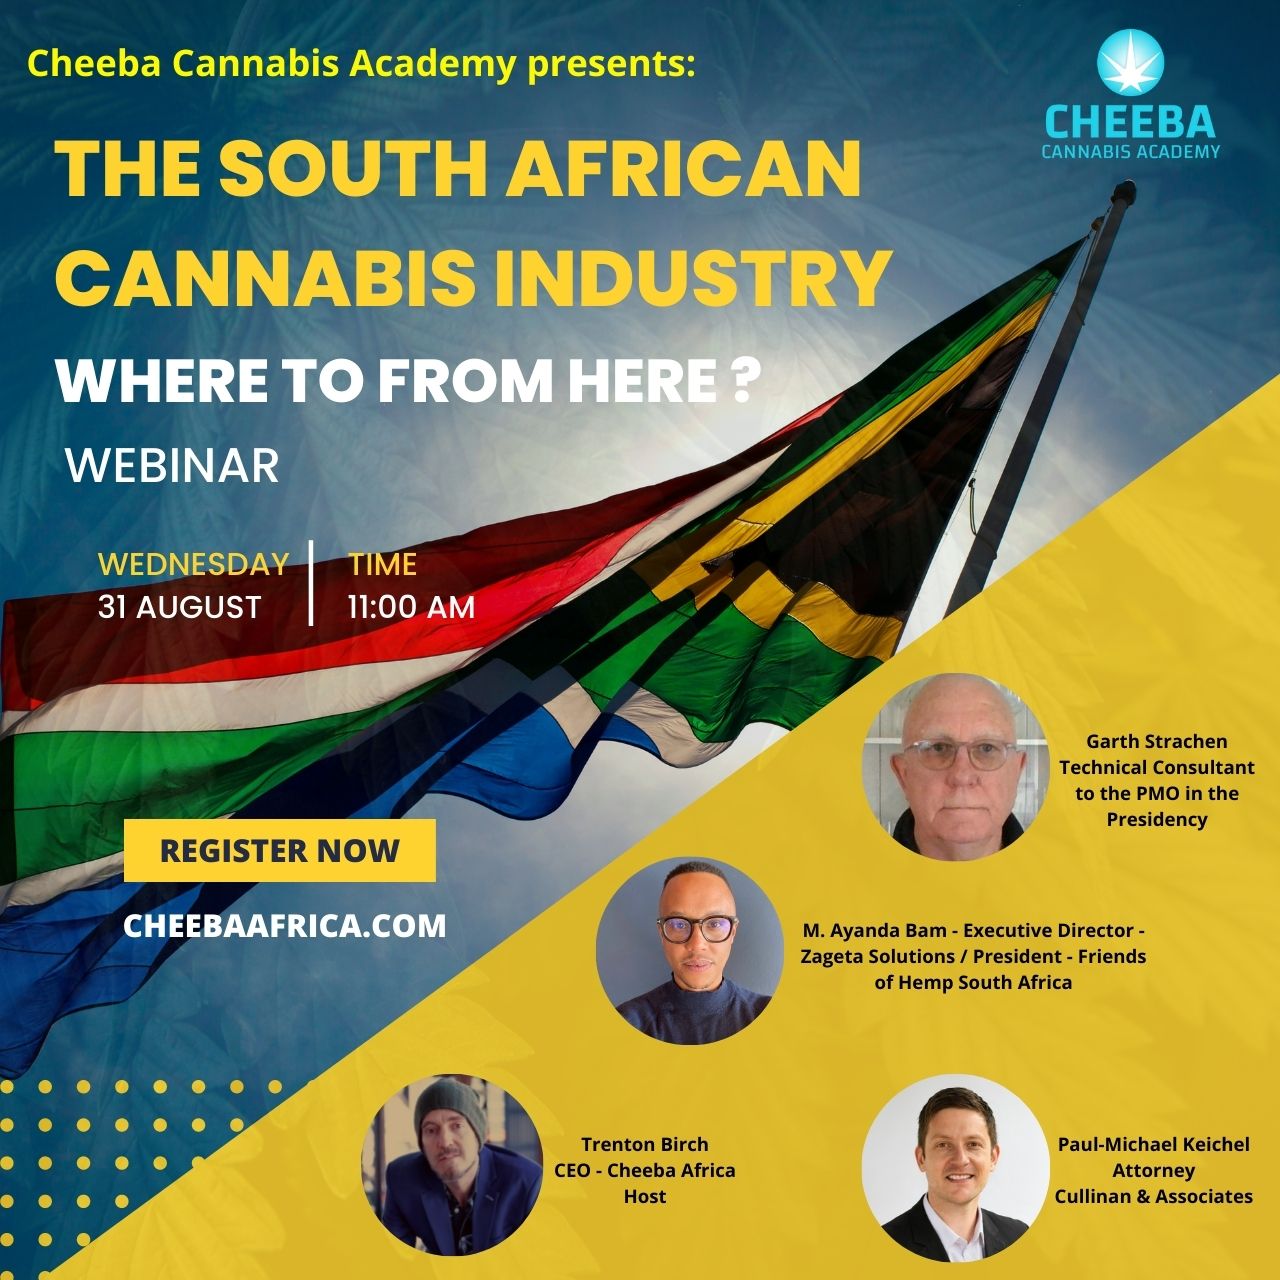 The South African Cannabis Industry - Where to from here? 